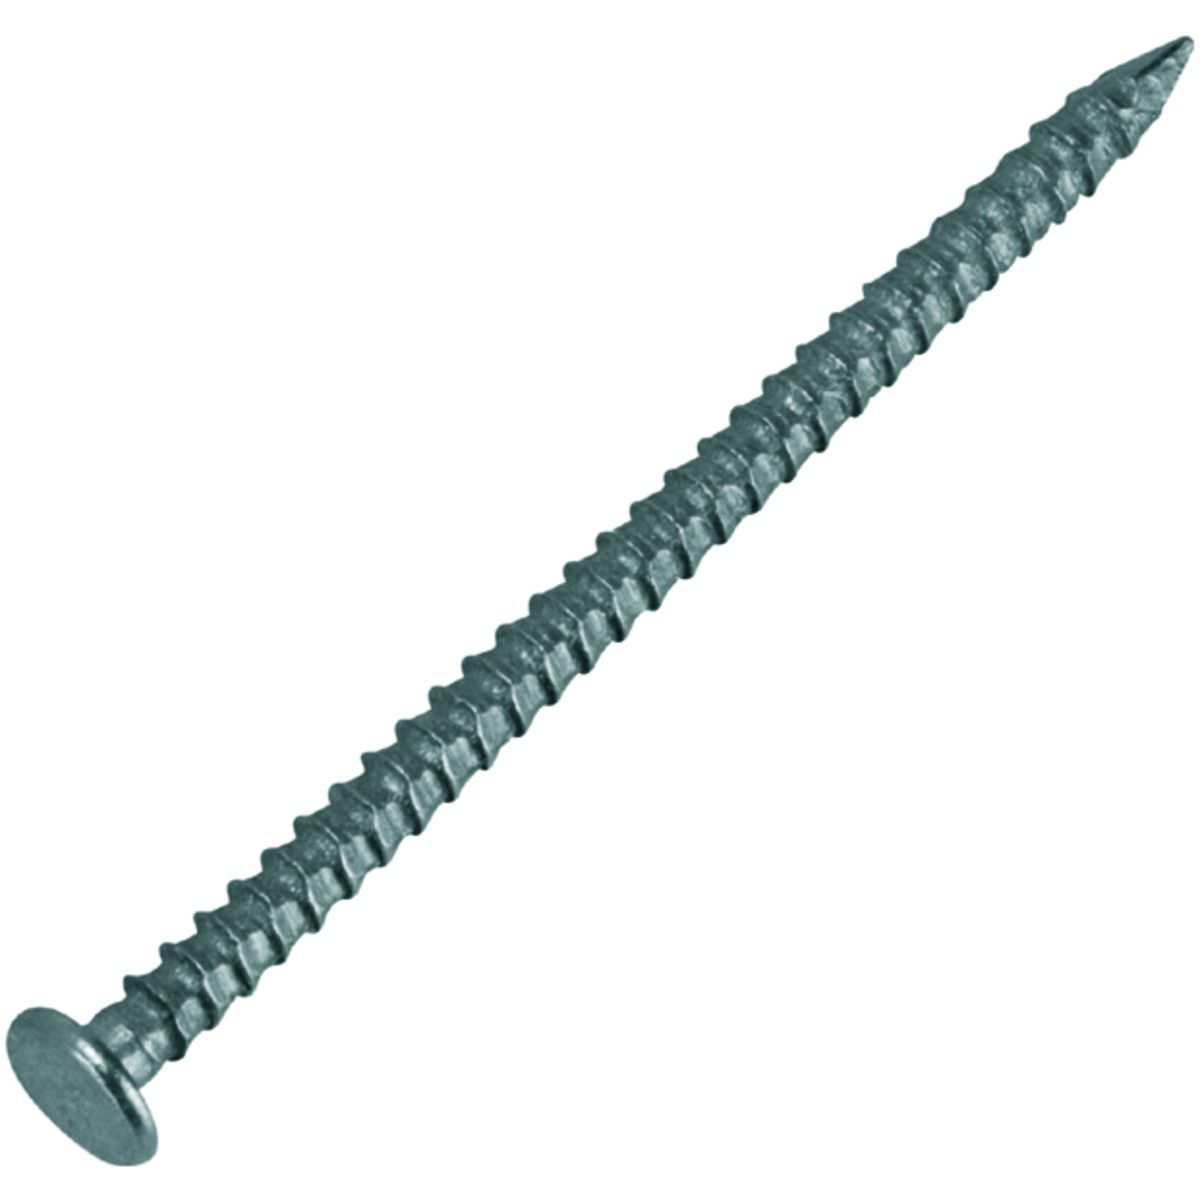 Image of Wickes 50mm Bright Annular Extra Grip Nails - 400g